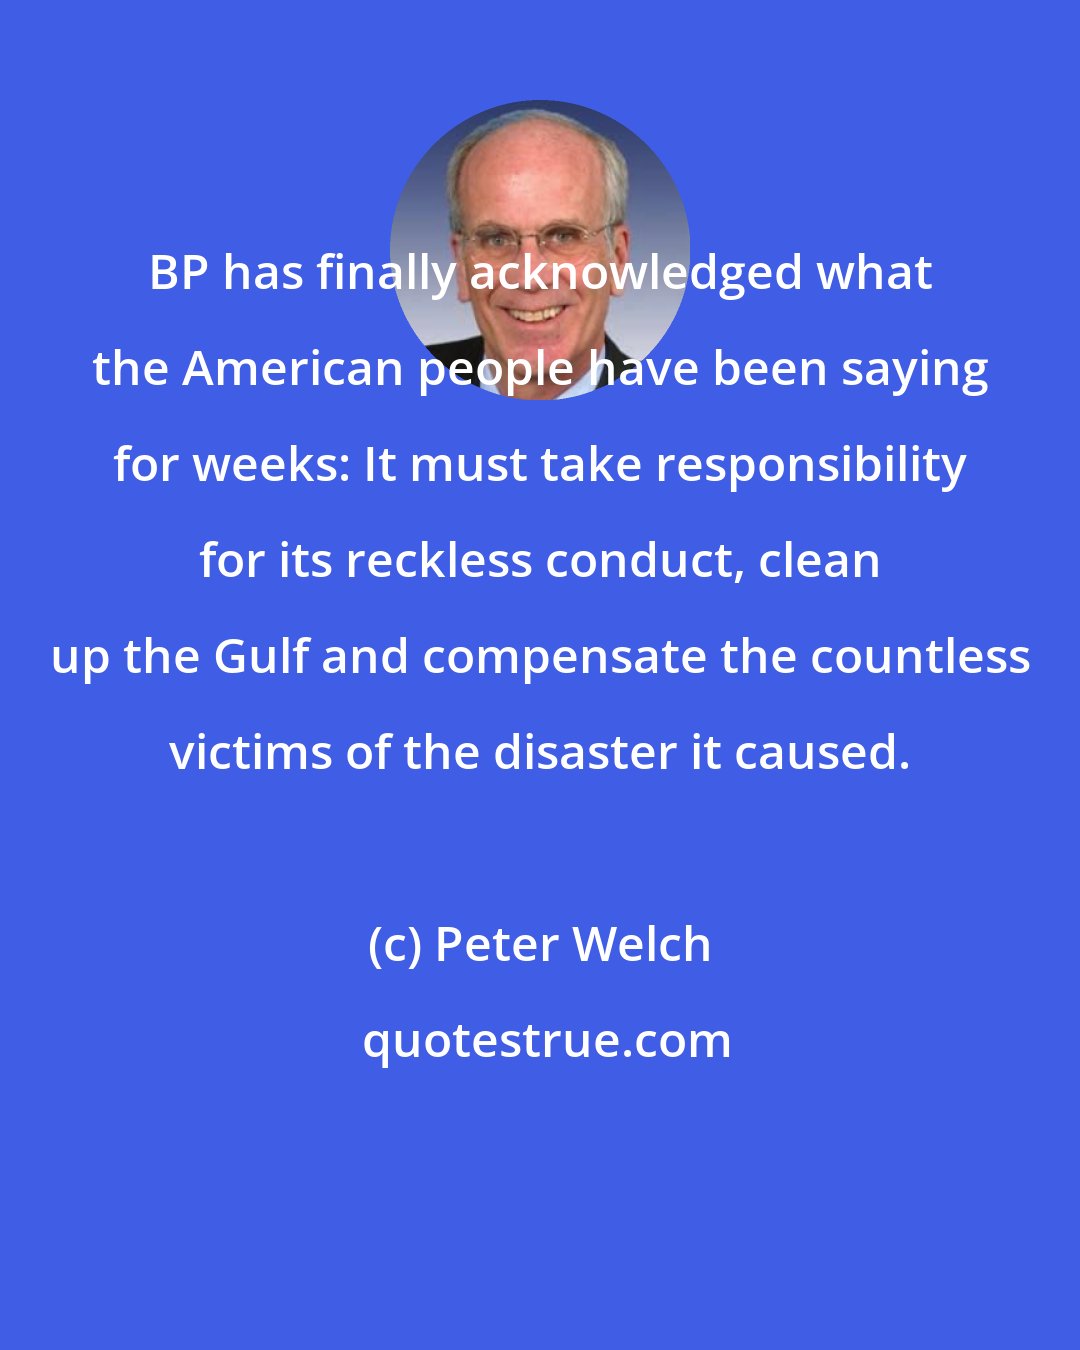 Peter Welch: BP has finally acknowledged what the American people have been saying for weeks: It must take responsibility for its reckless conduct, clean up the Gulf and compensate the countless victims of the disaster it caused.